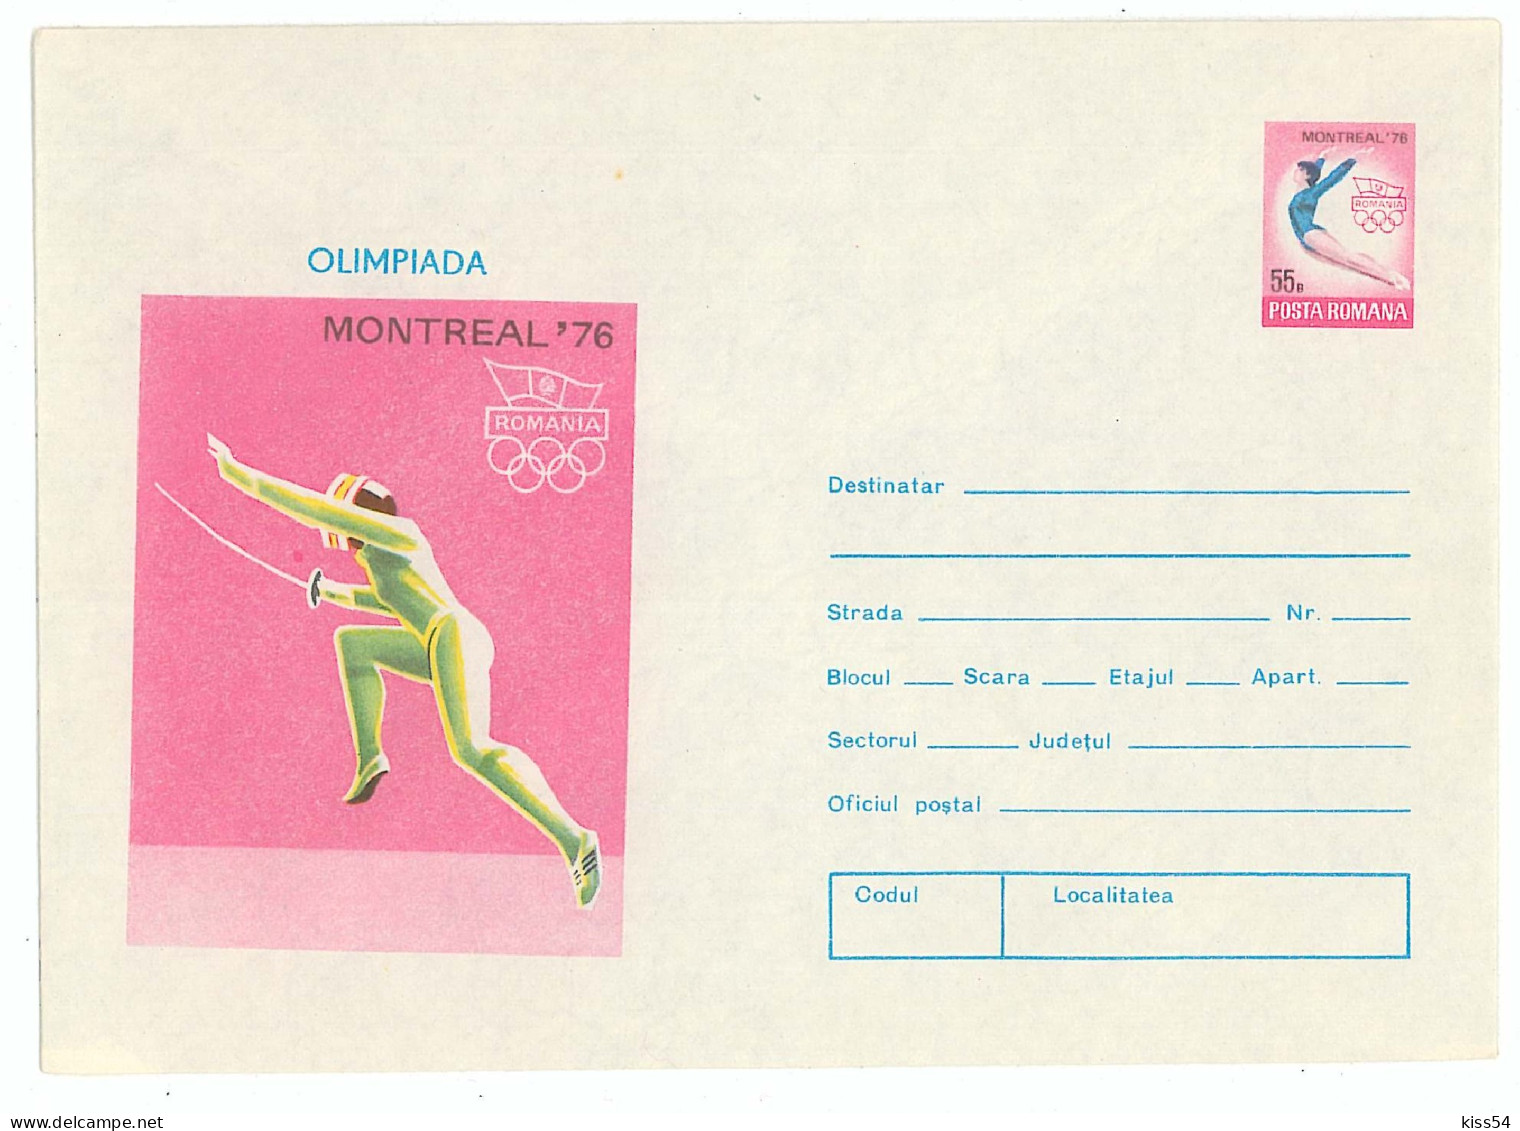 IP 76 - 127 FENCING, Montreal Olympics Games, Romania - Stationery - Unused - 1976 - Entiers Postaux